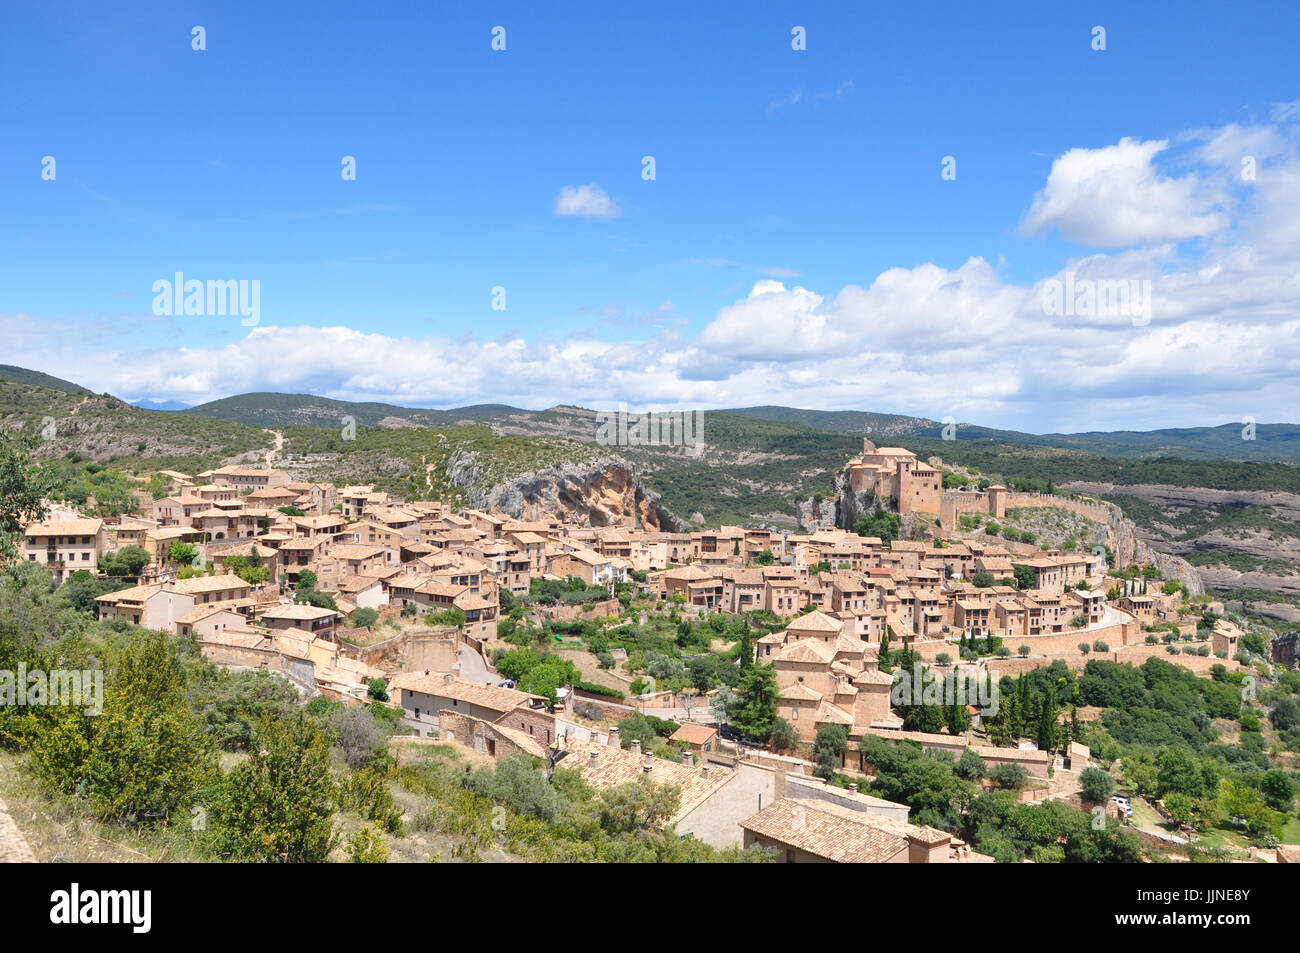 Alquezar is a medieval town in the north of Spain. Stock Photo